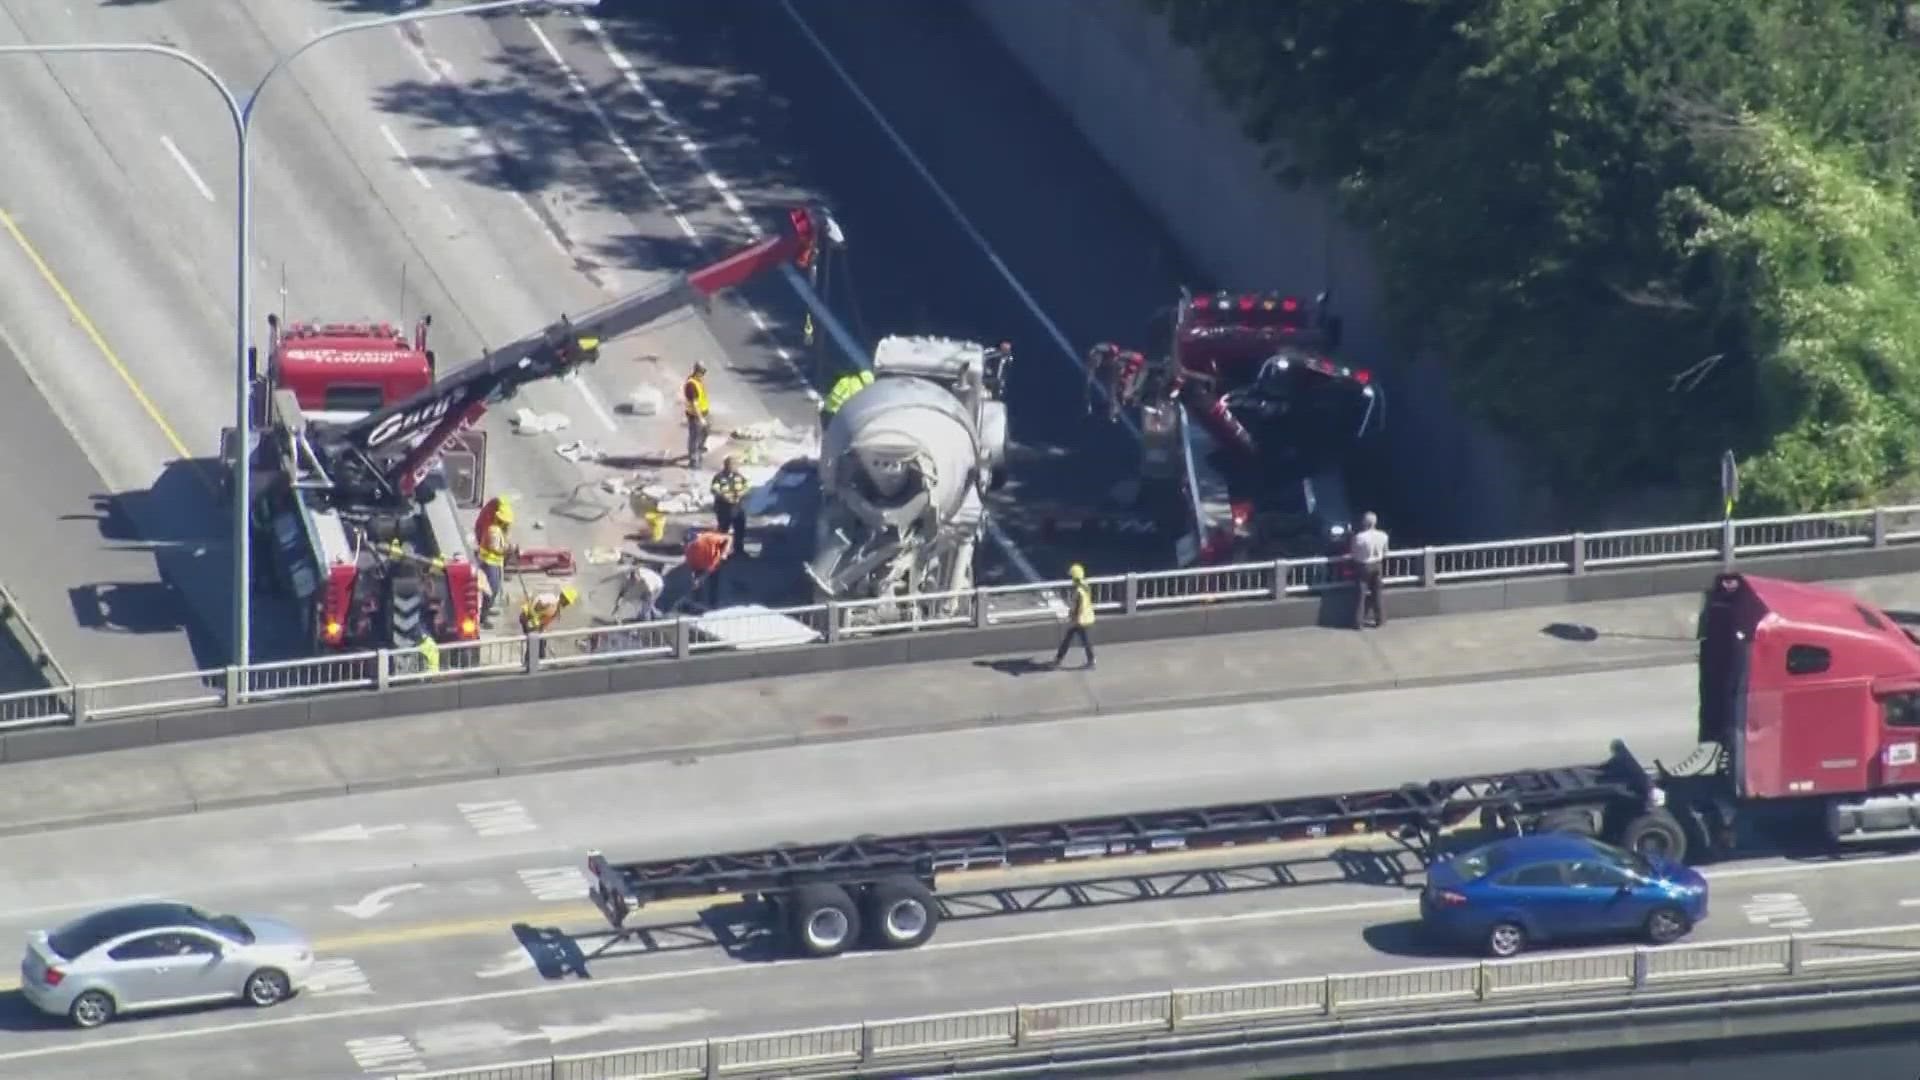 A cement truck rolled over on northbound I-5 near SR 520 Friday morning, causing lengthy backups in the area. All lanes reopened to traffic just after 11 a.m.